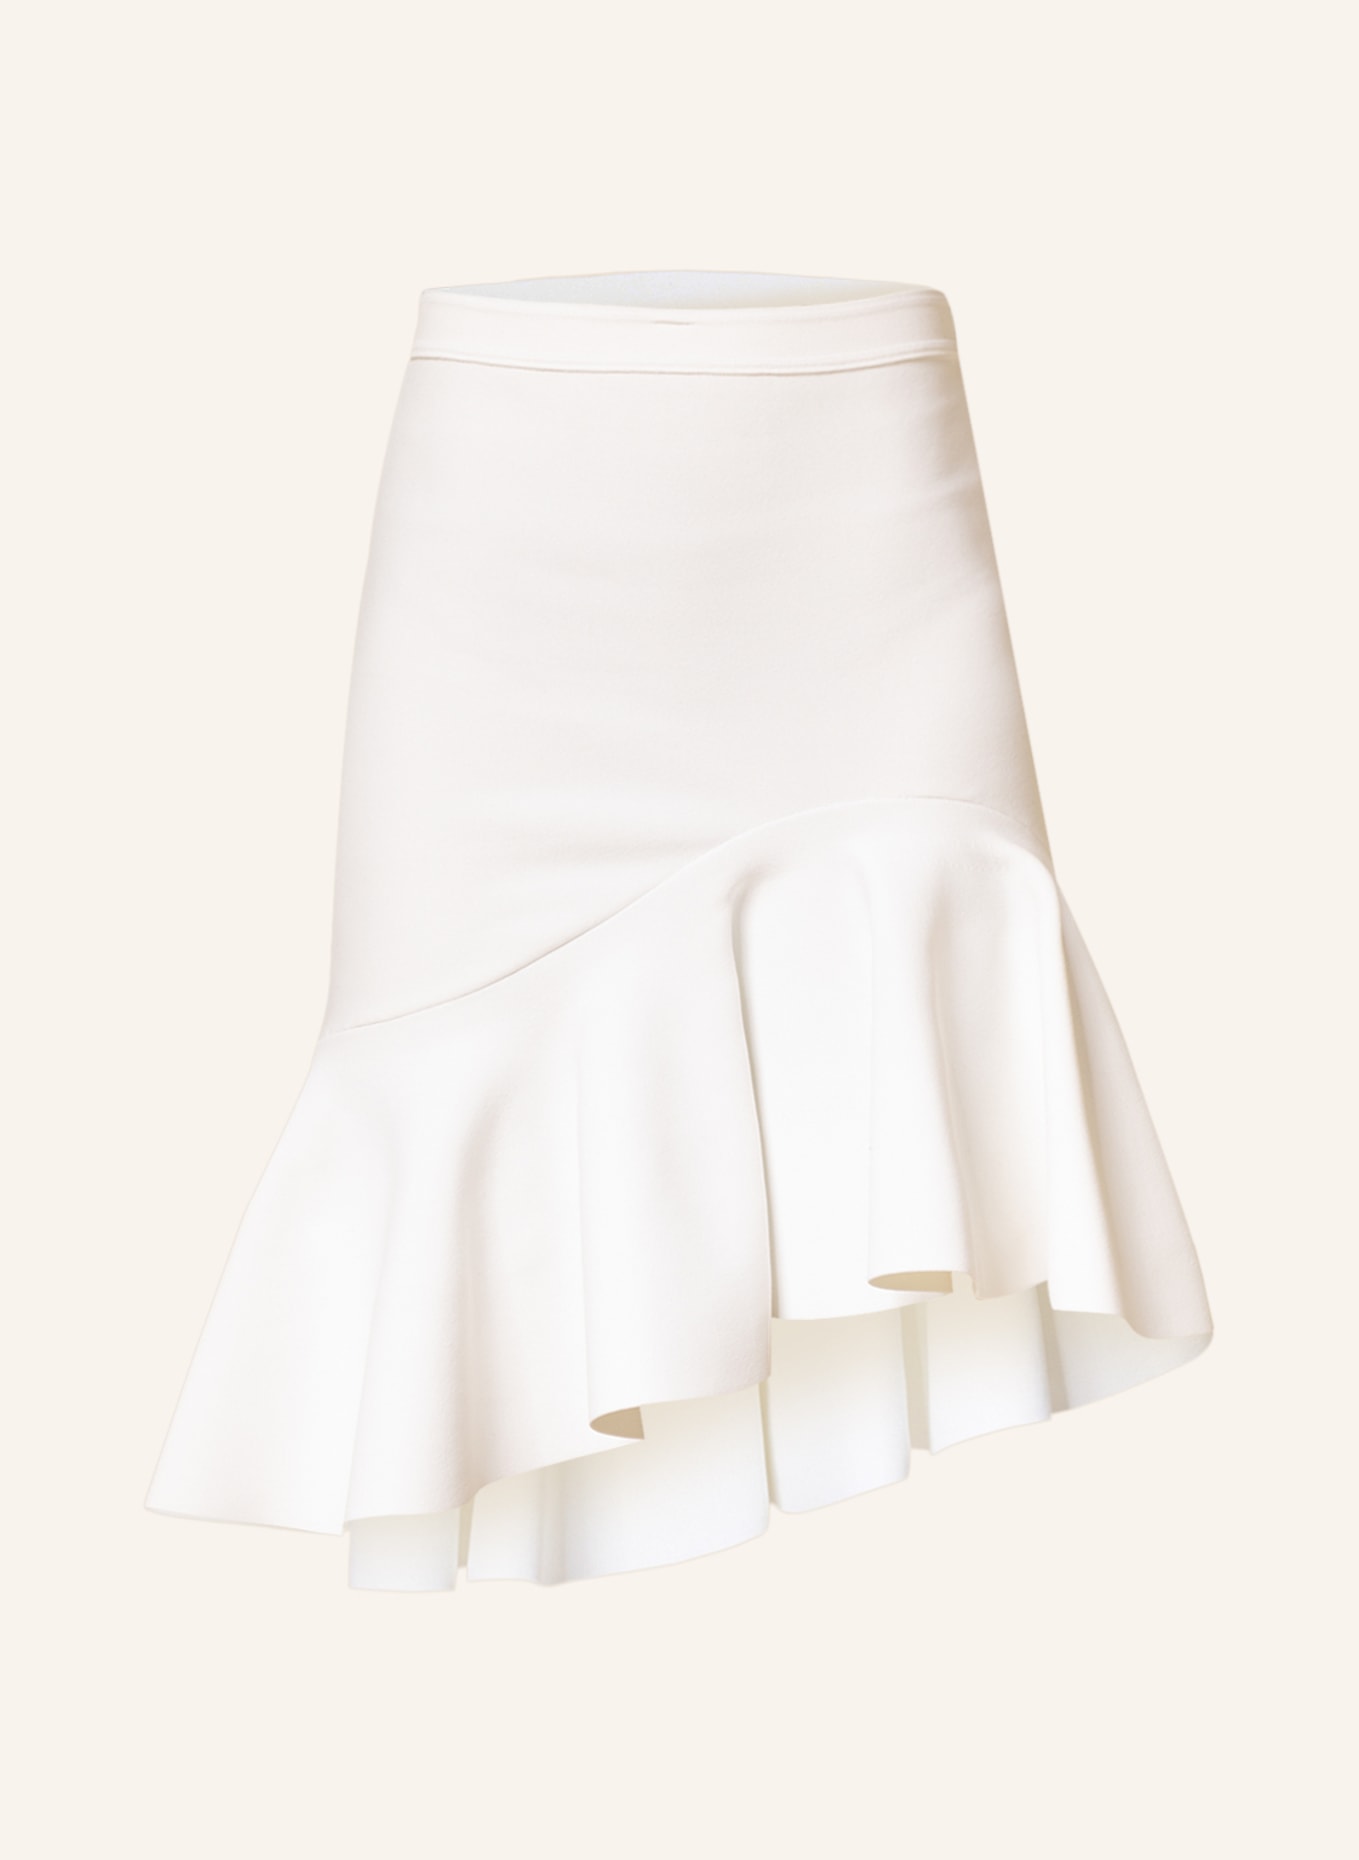 Alexander McQUEEN Skirt with frills, Color: WHITE (Image 1)